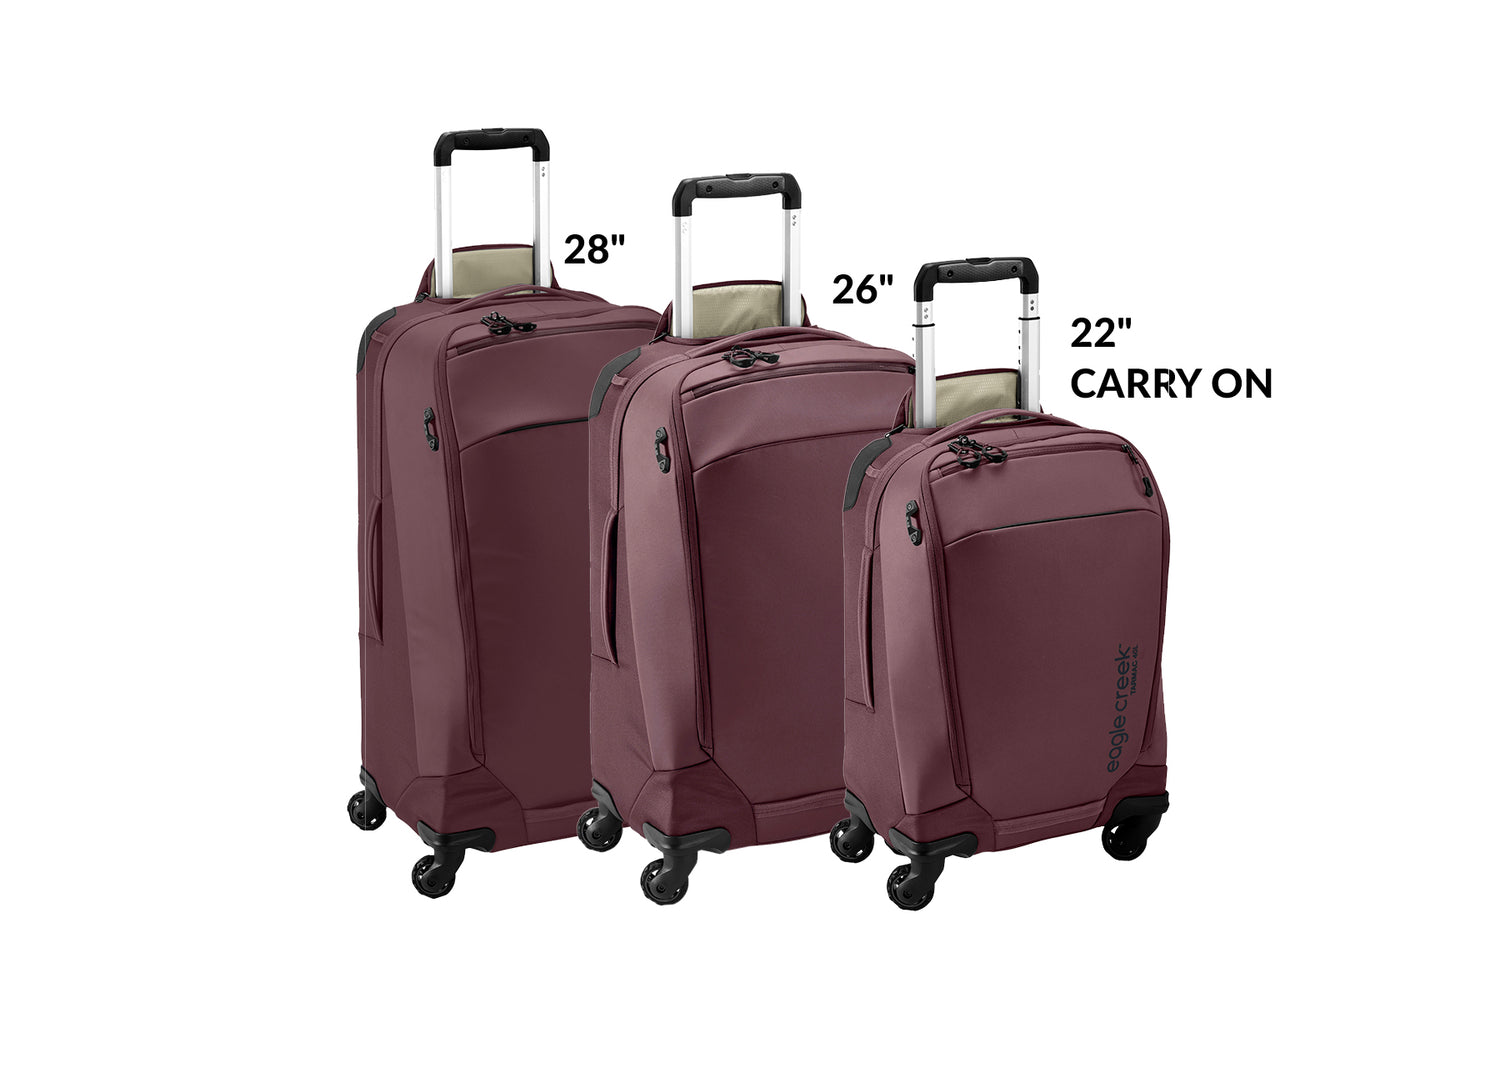 Eagle Creek Tarmac 22 Inch Carry-On Luggage | Carry on luggage, Luggage,  Backpack with wheels